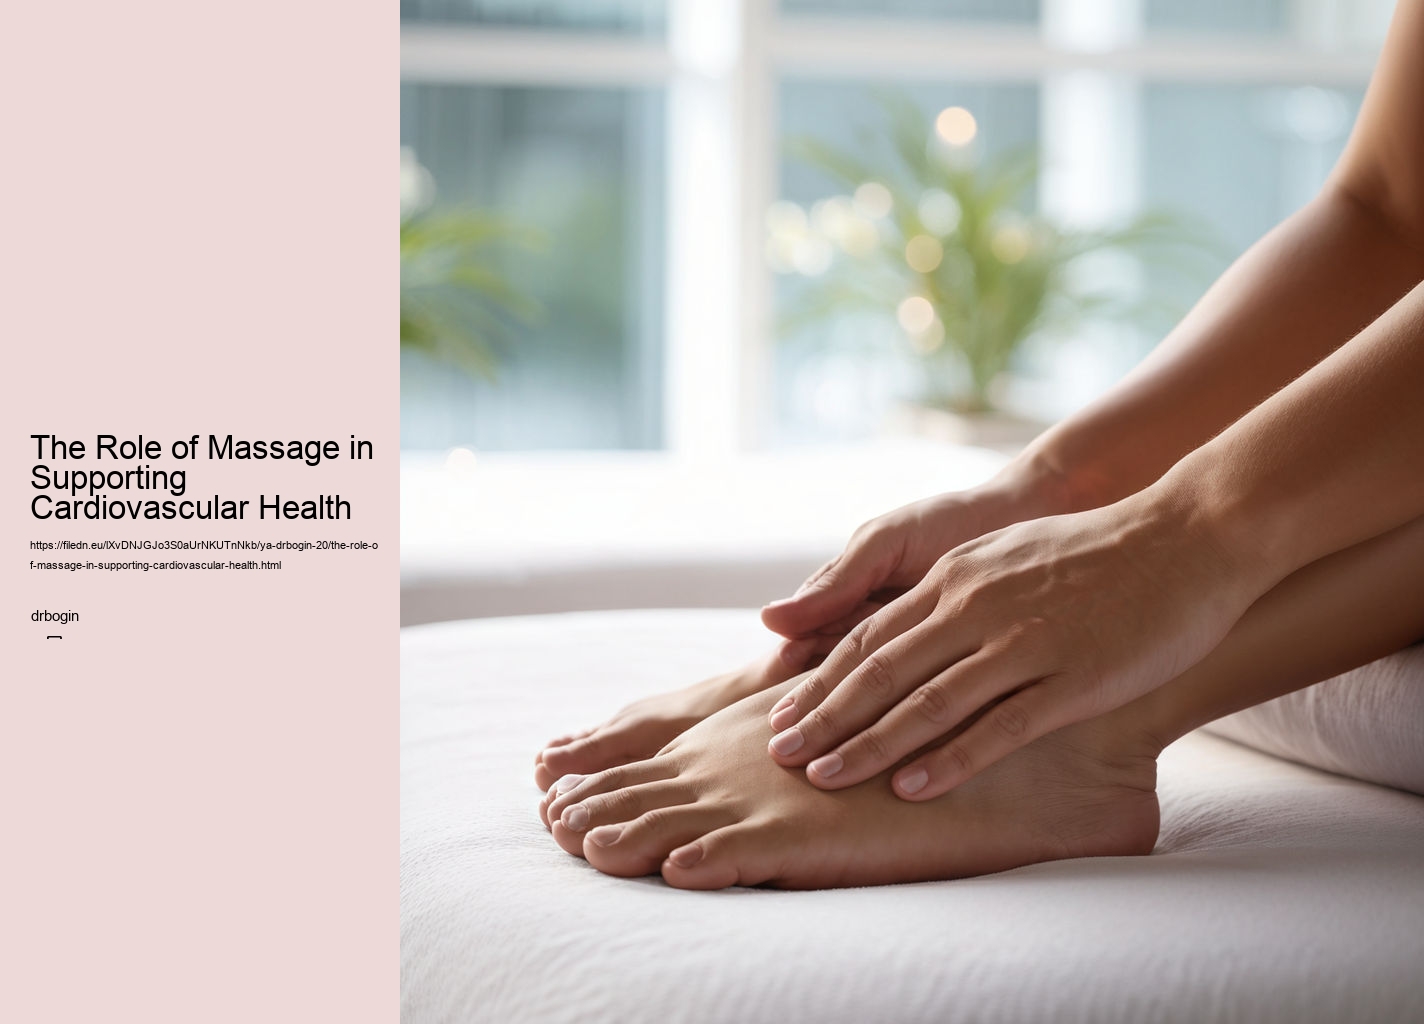 The Role of Massage in Supporting Cardiovascular Health